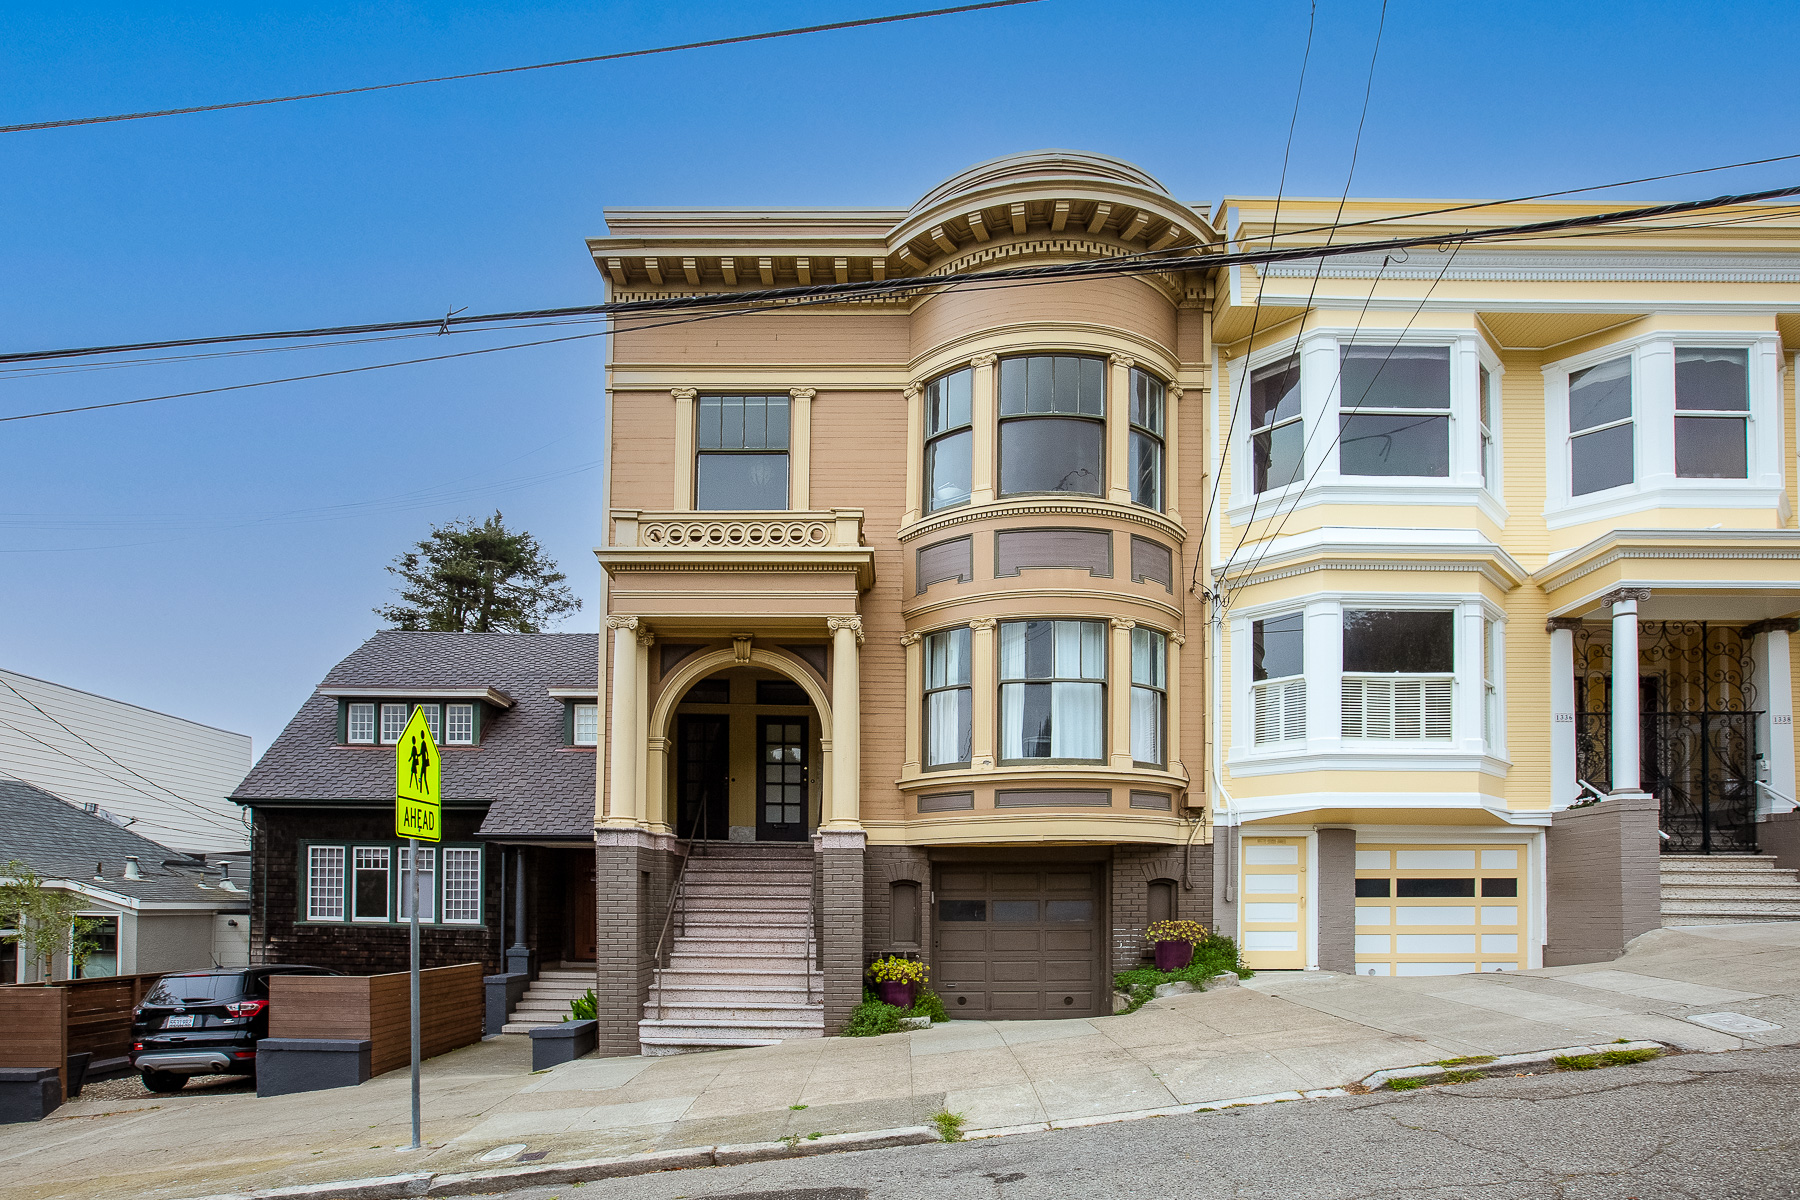 Property Photo: Exterior view of 1330 Shrader Street in Cole Valley